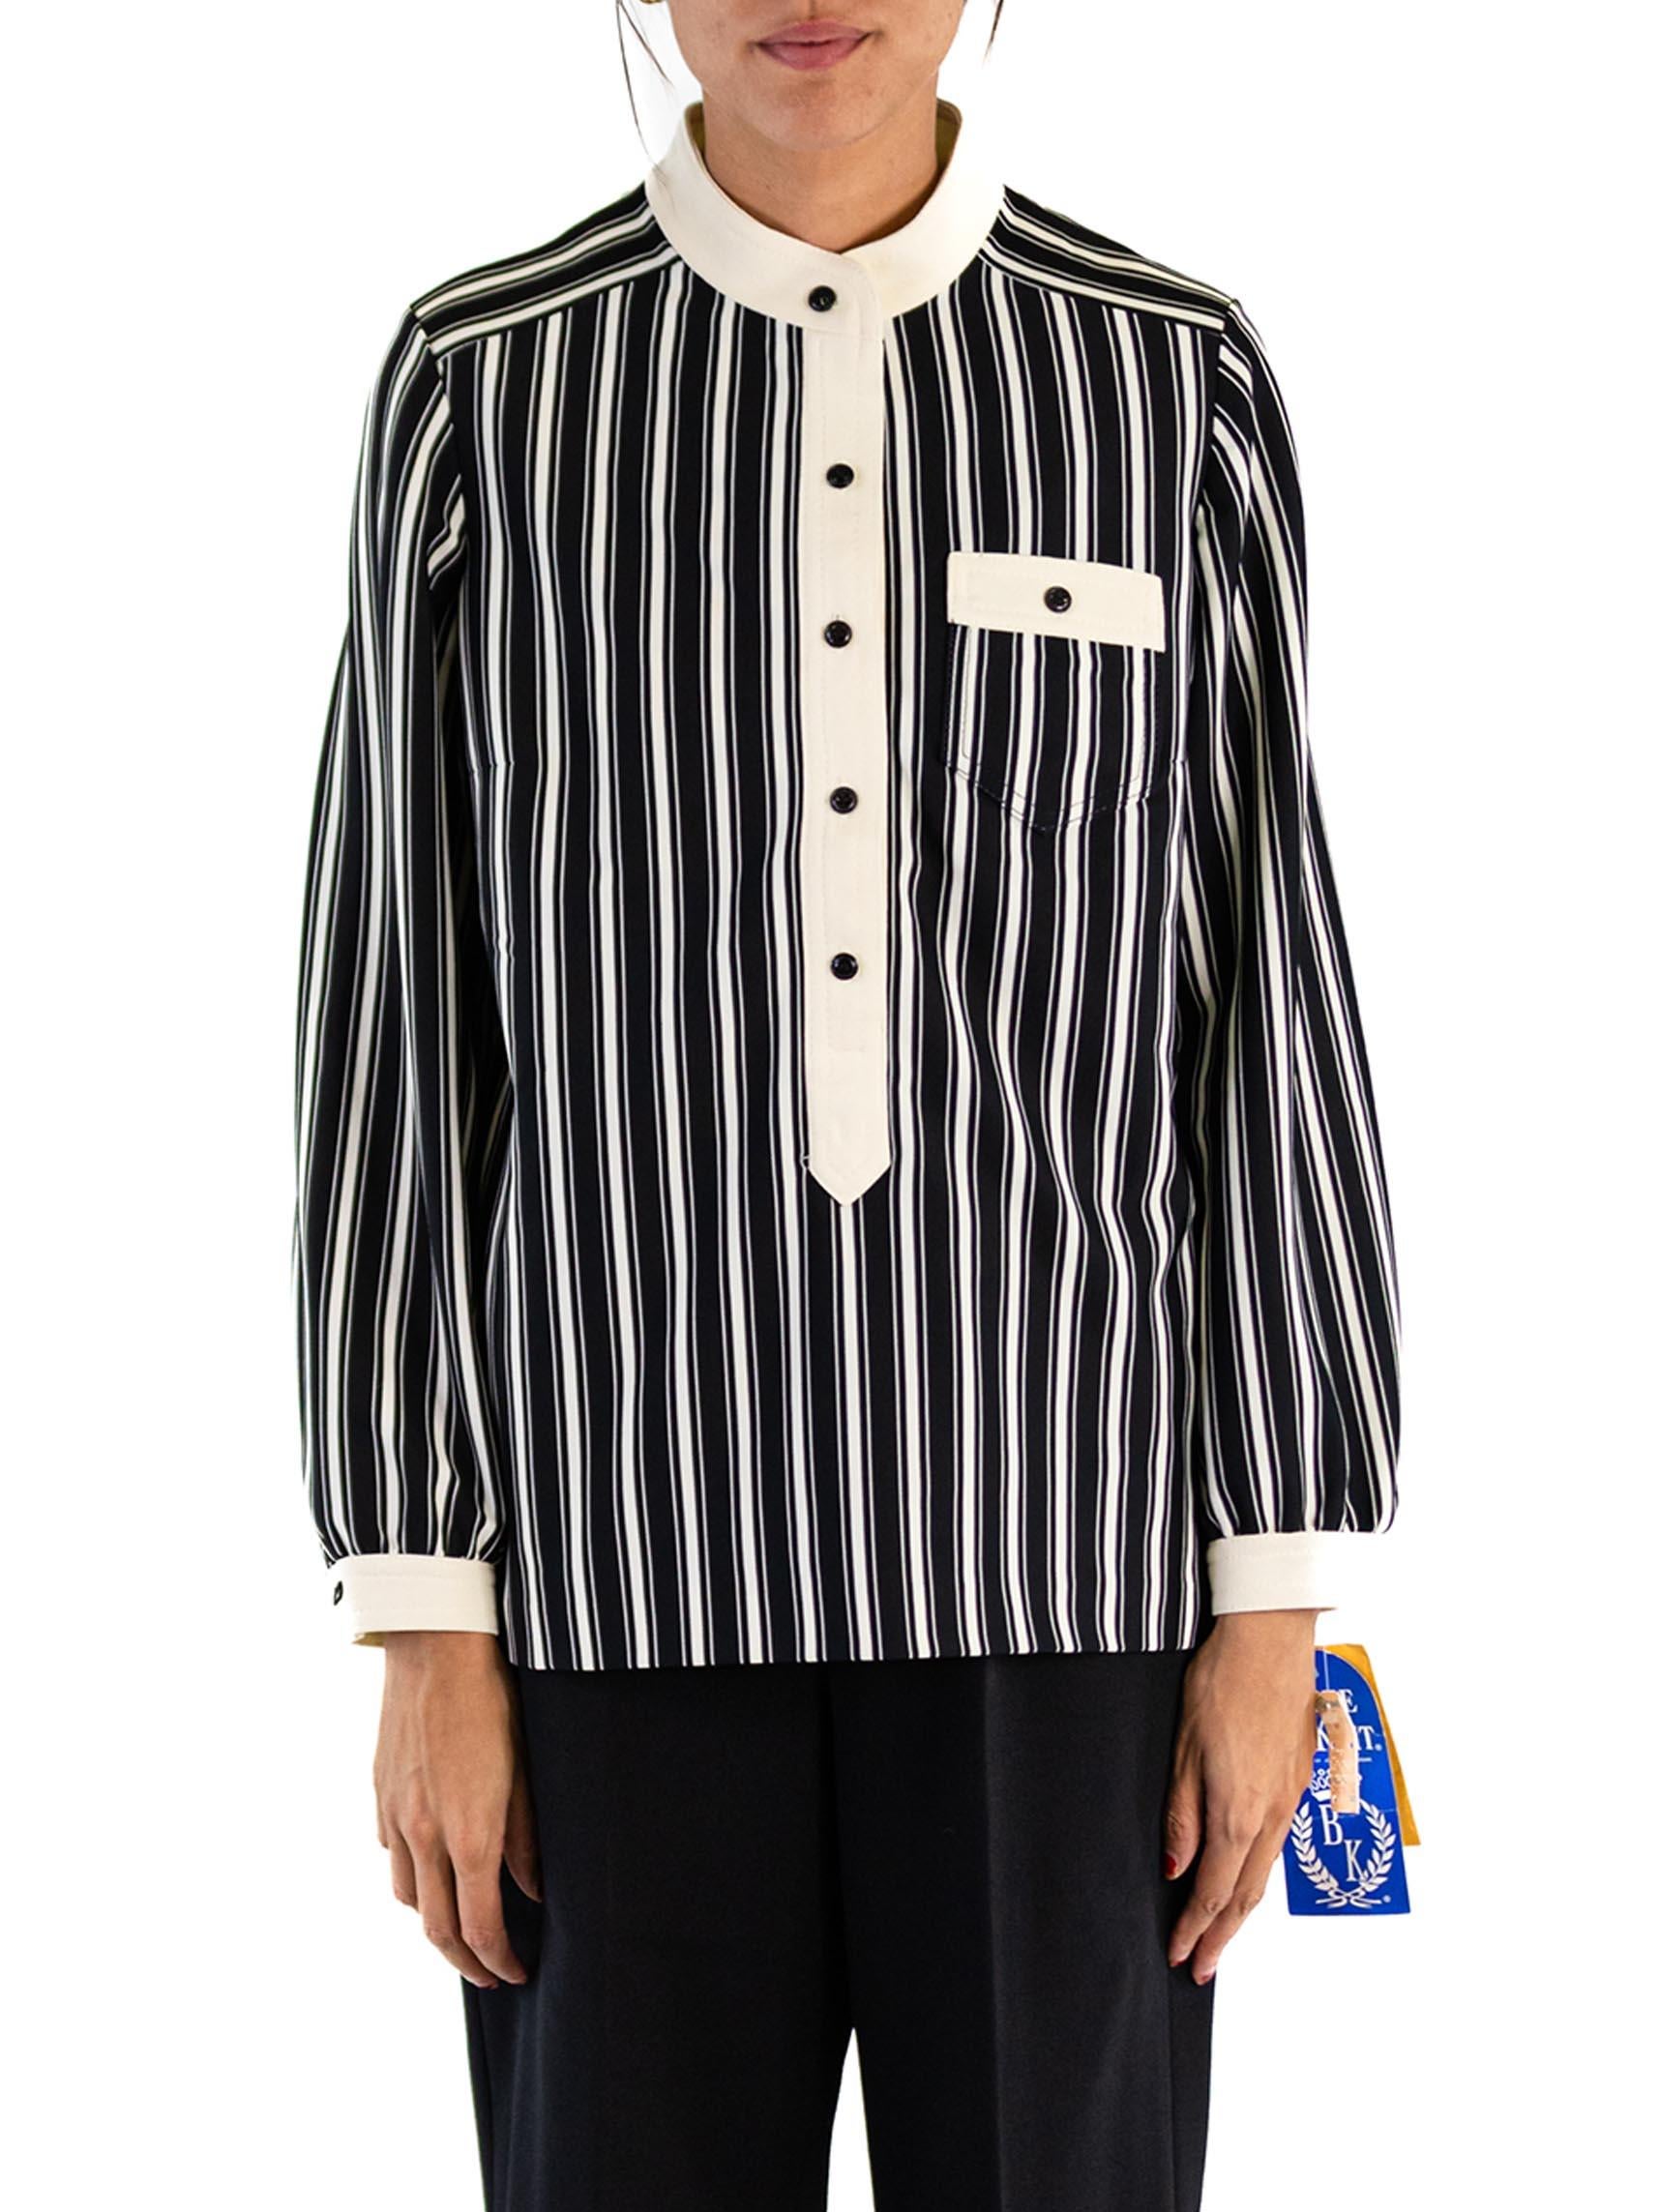 1960S Black & White Striped Polyester Double Knit Mod Shirt Pant Ensemble In Excellent Condition For Sale In New York, NY